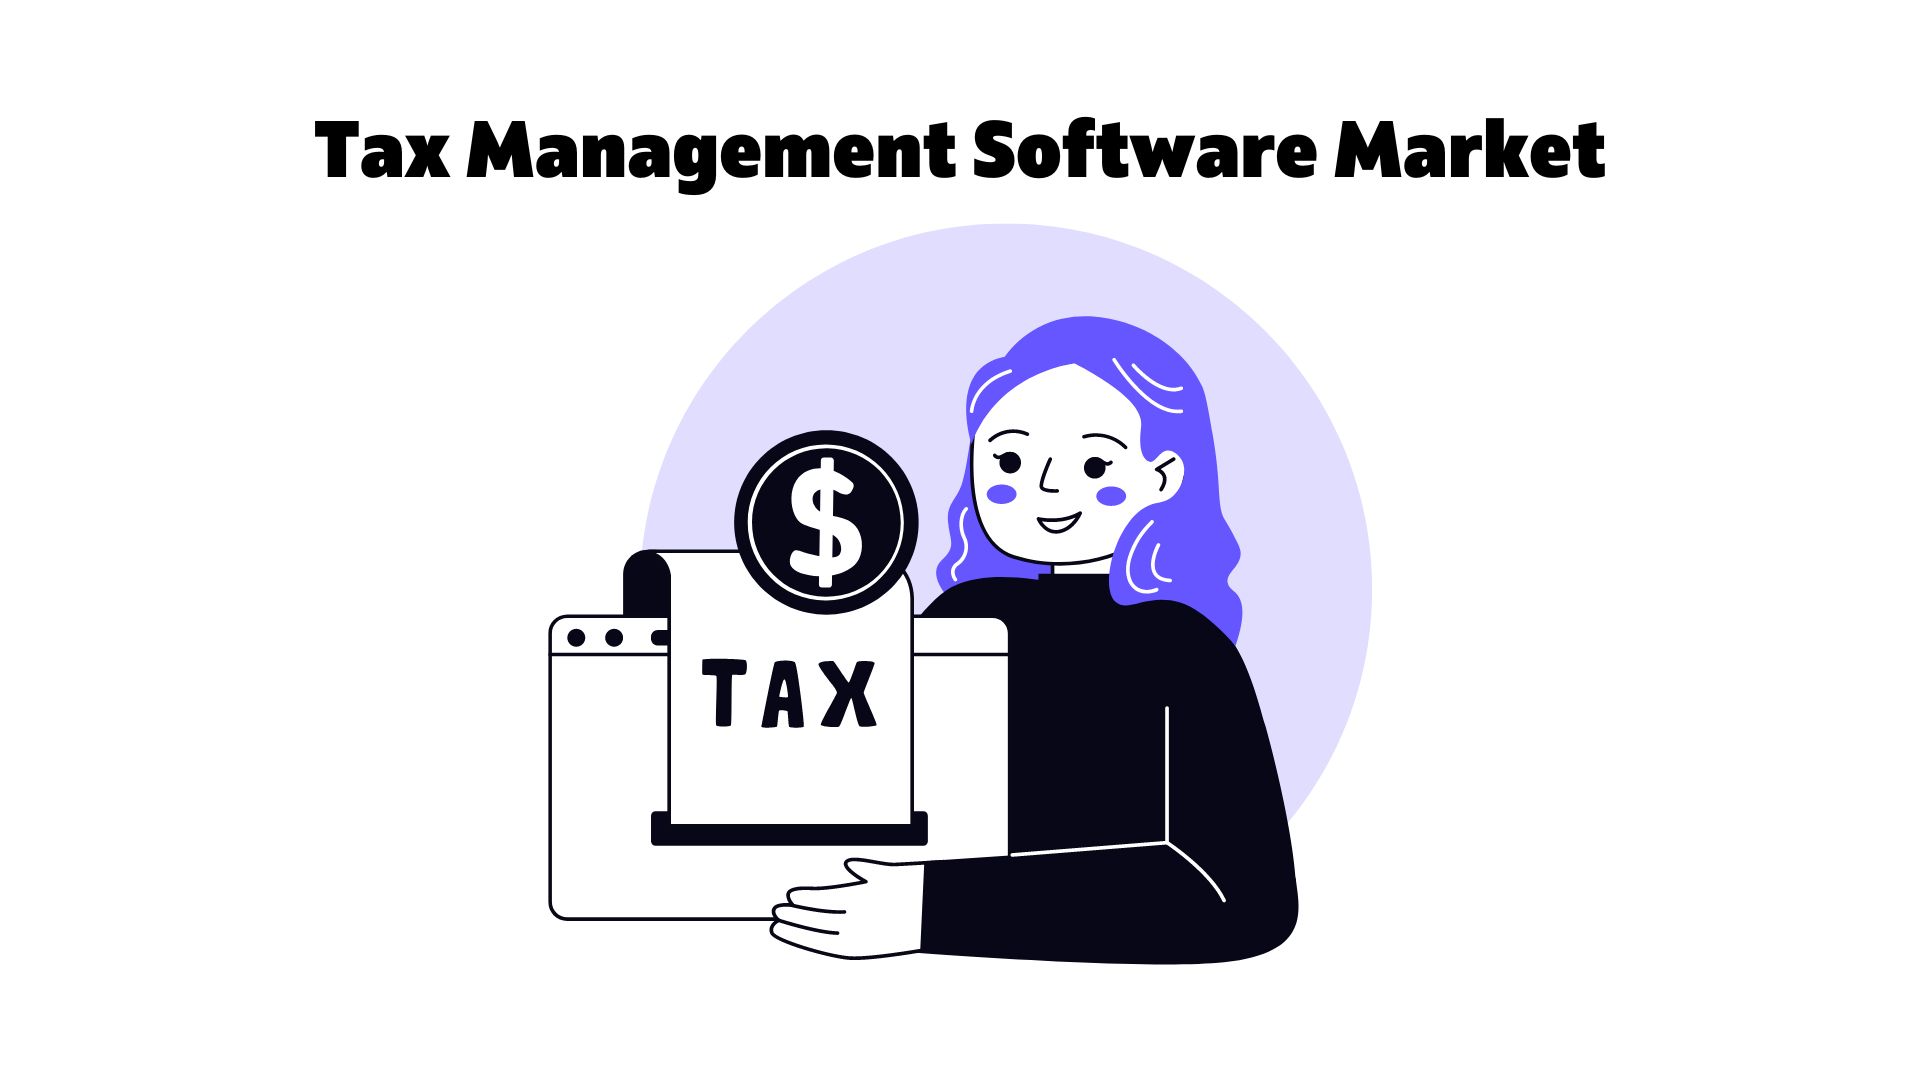 Tax Management Software Market Expected To Reach USD 10.83 Billion in 2032